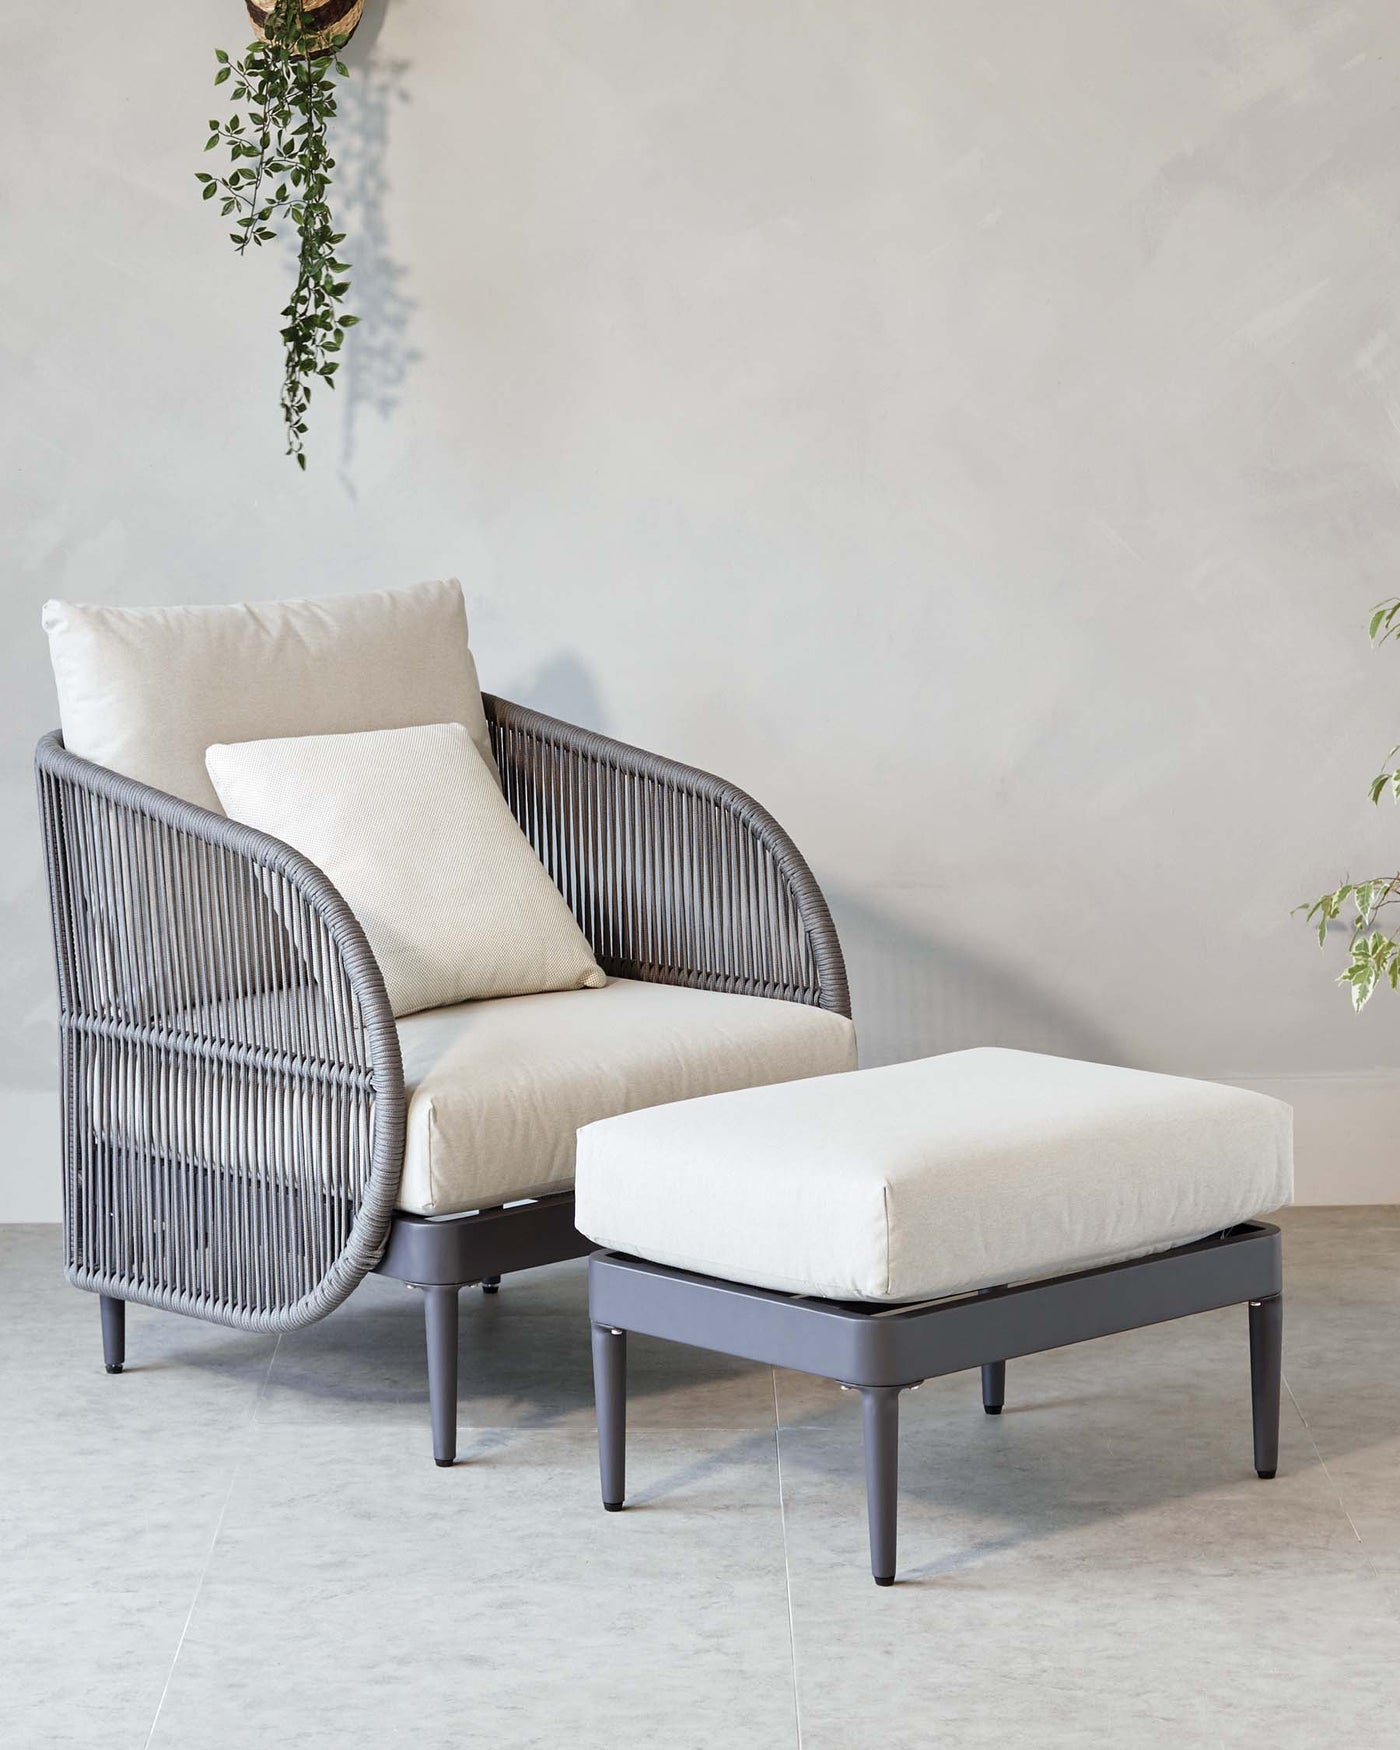 Modern armchair with taupe vertical wicker design and cream cushions paired with a matching simple square ottoman on a clean, neutral tiled floor, accented with a hanging potted plant with trailing green leaves.